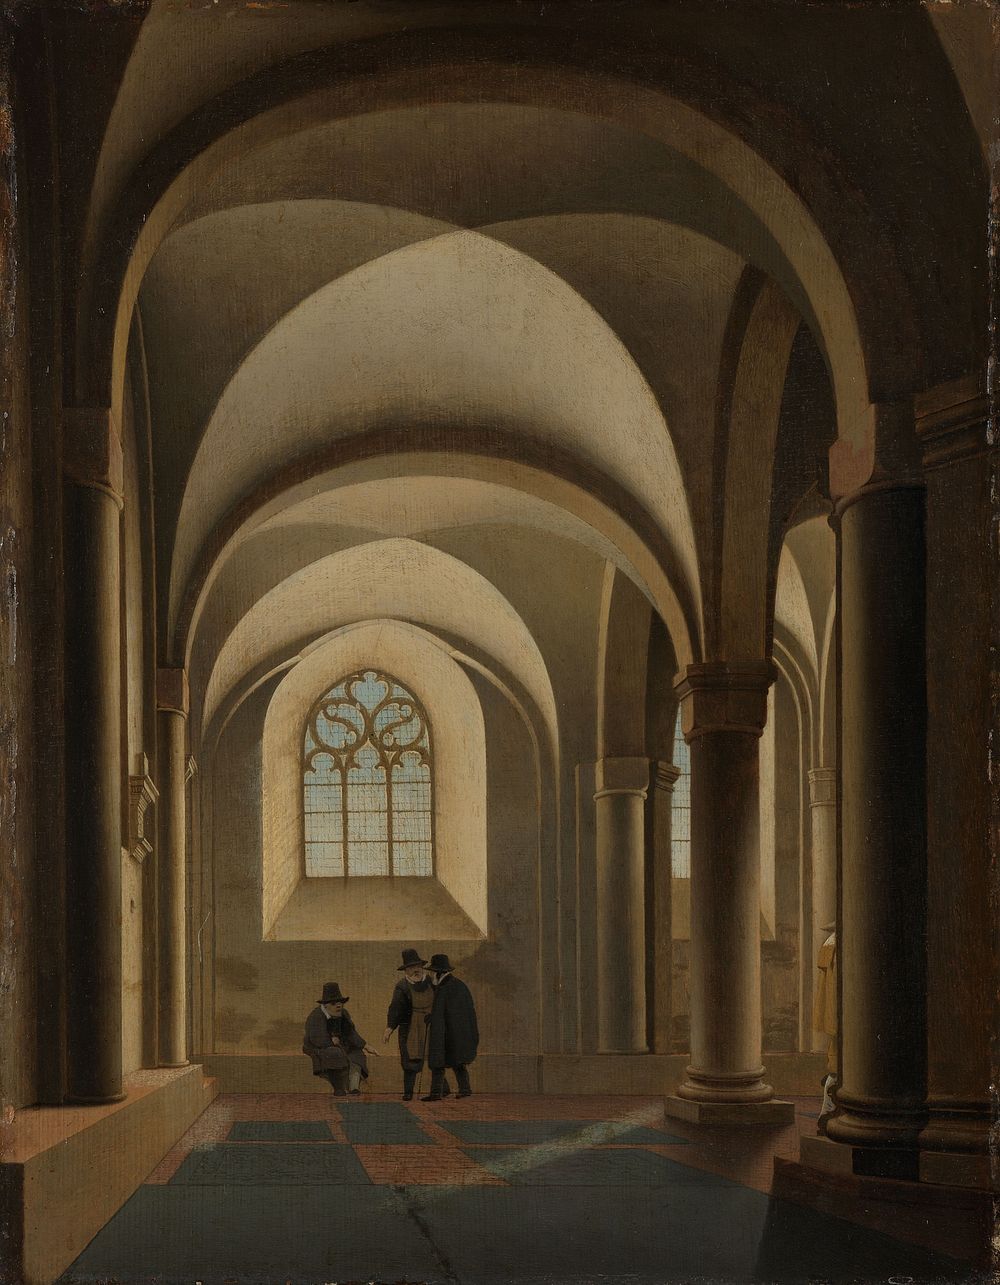 The Westernmost Bays of the South Aisle of the Mariakerk in Utrecht (c. 1640 - c. 1645) by Pieter Jansz Saenredam